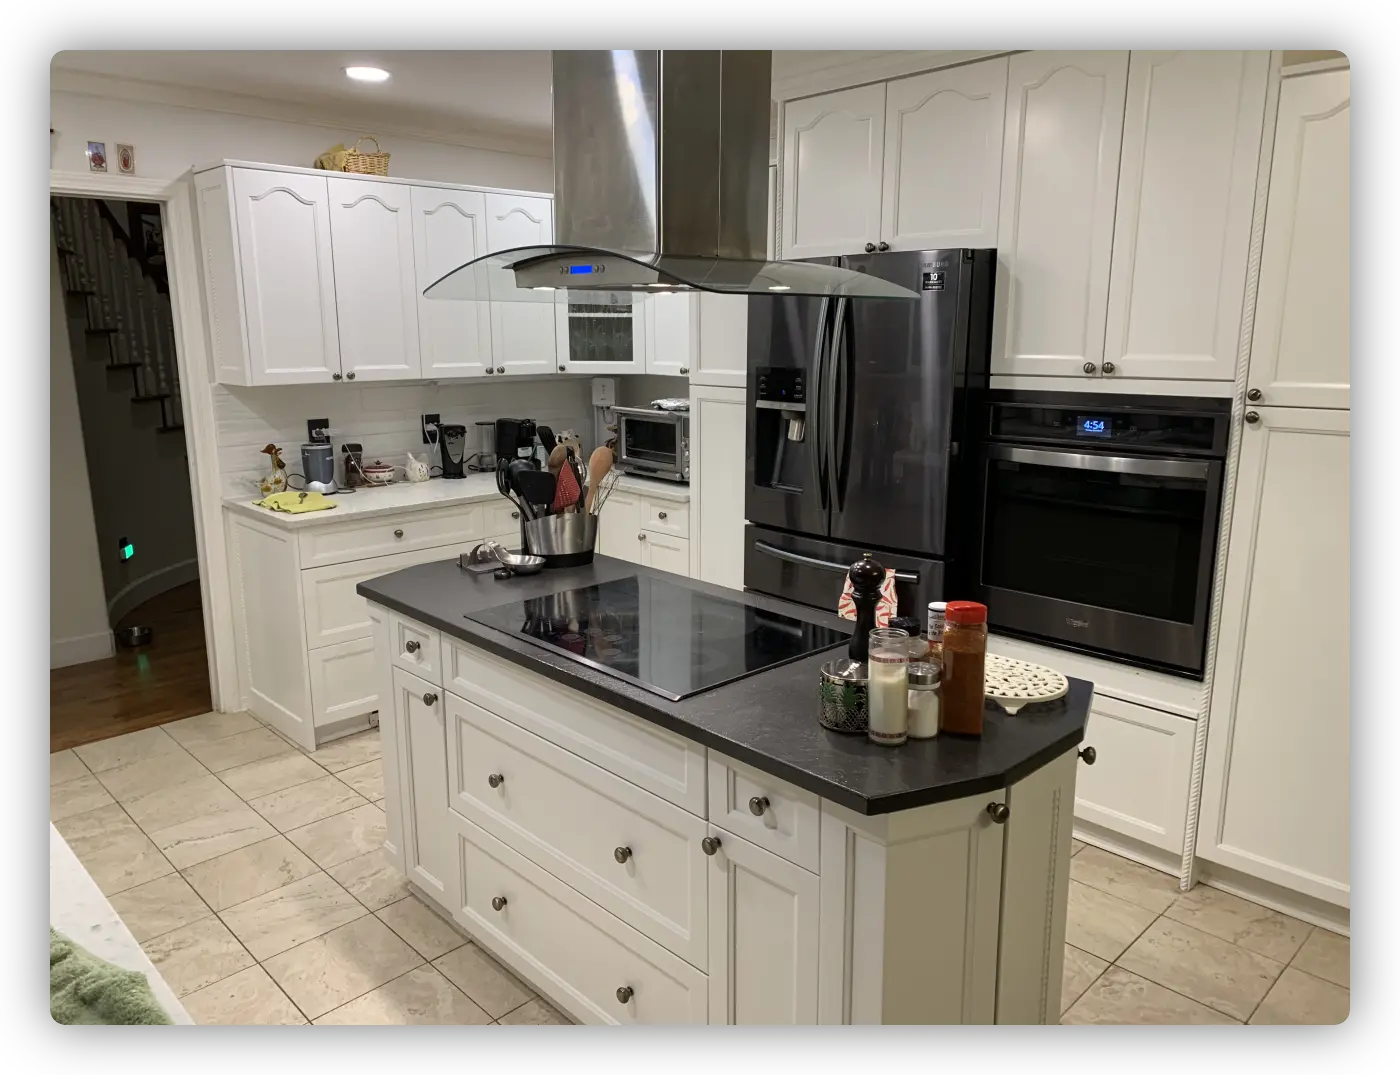 Example of a painted kitchen cabinets?